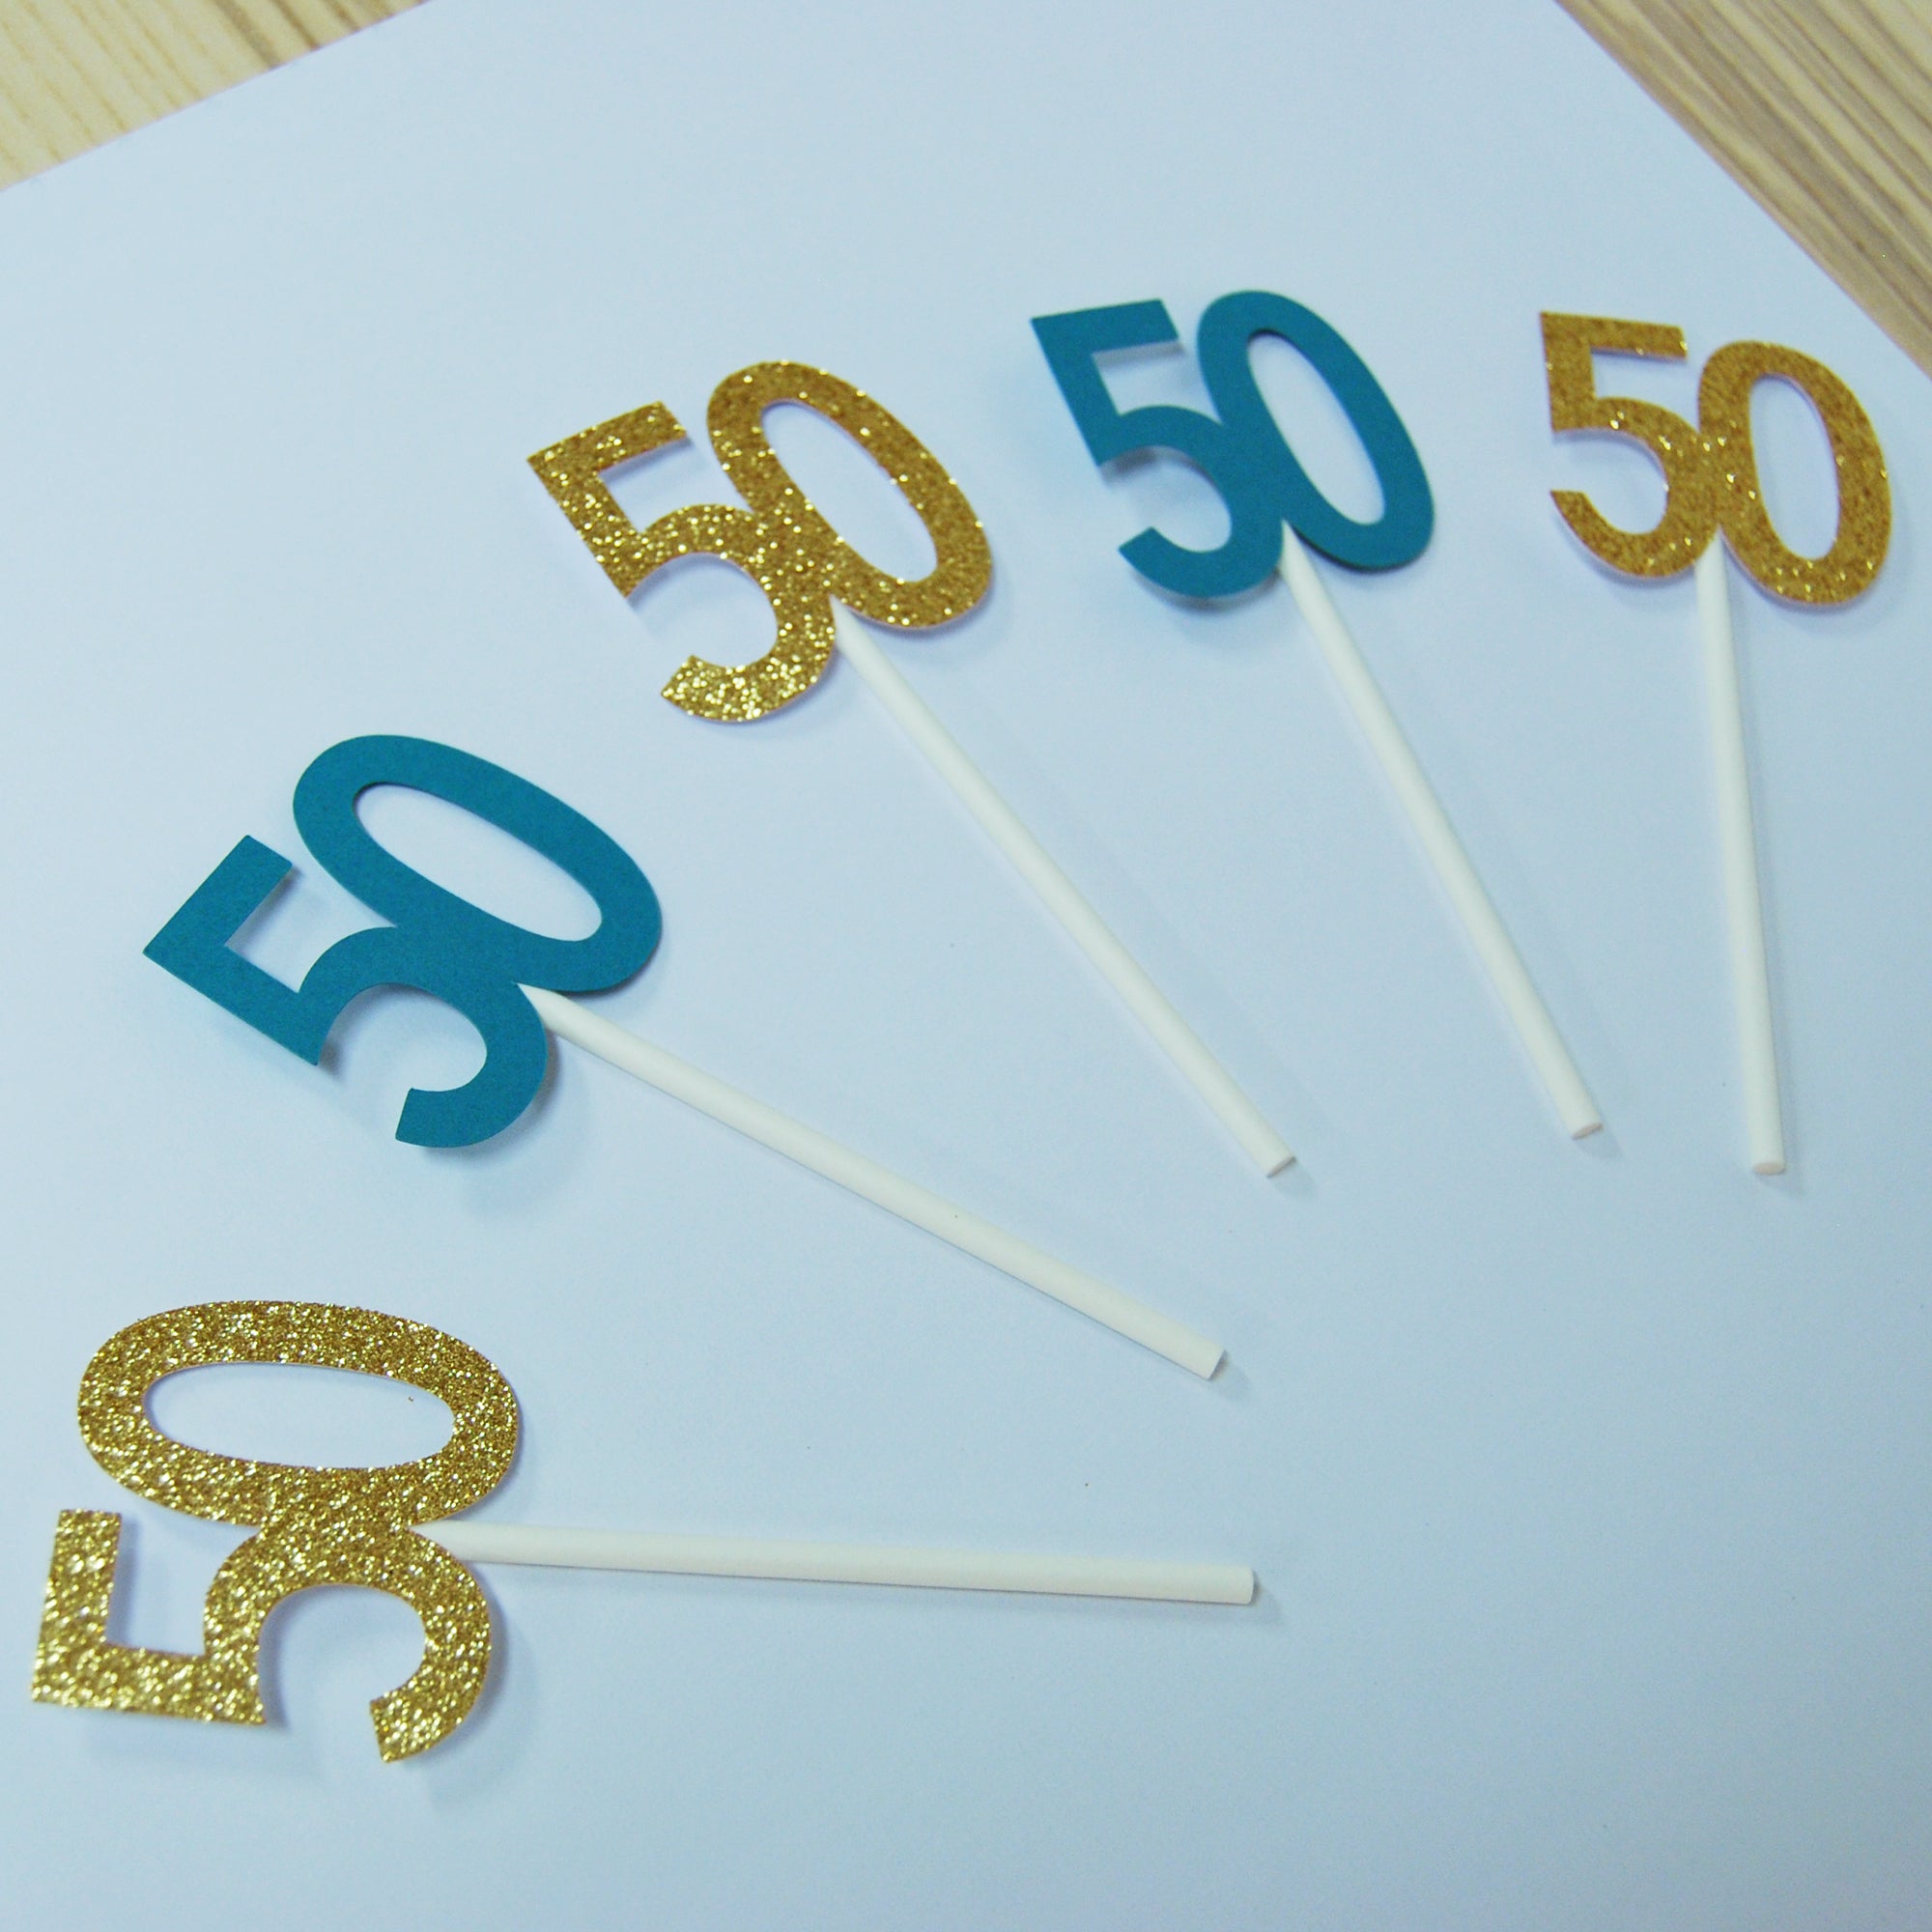 50th-birthday-cupcake-toppers-partyatyourdoor